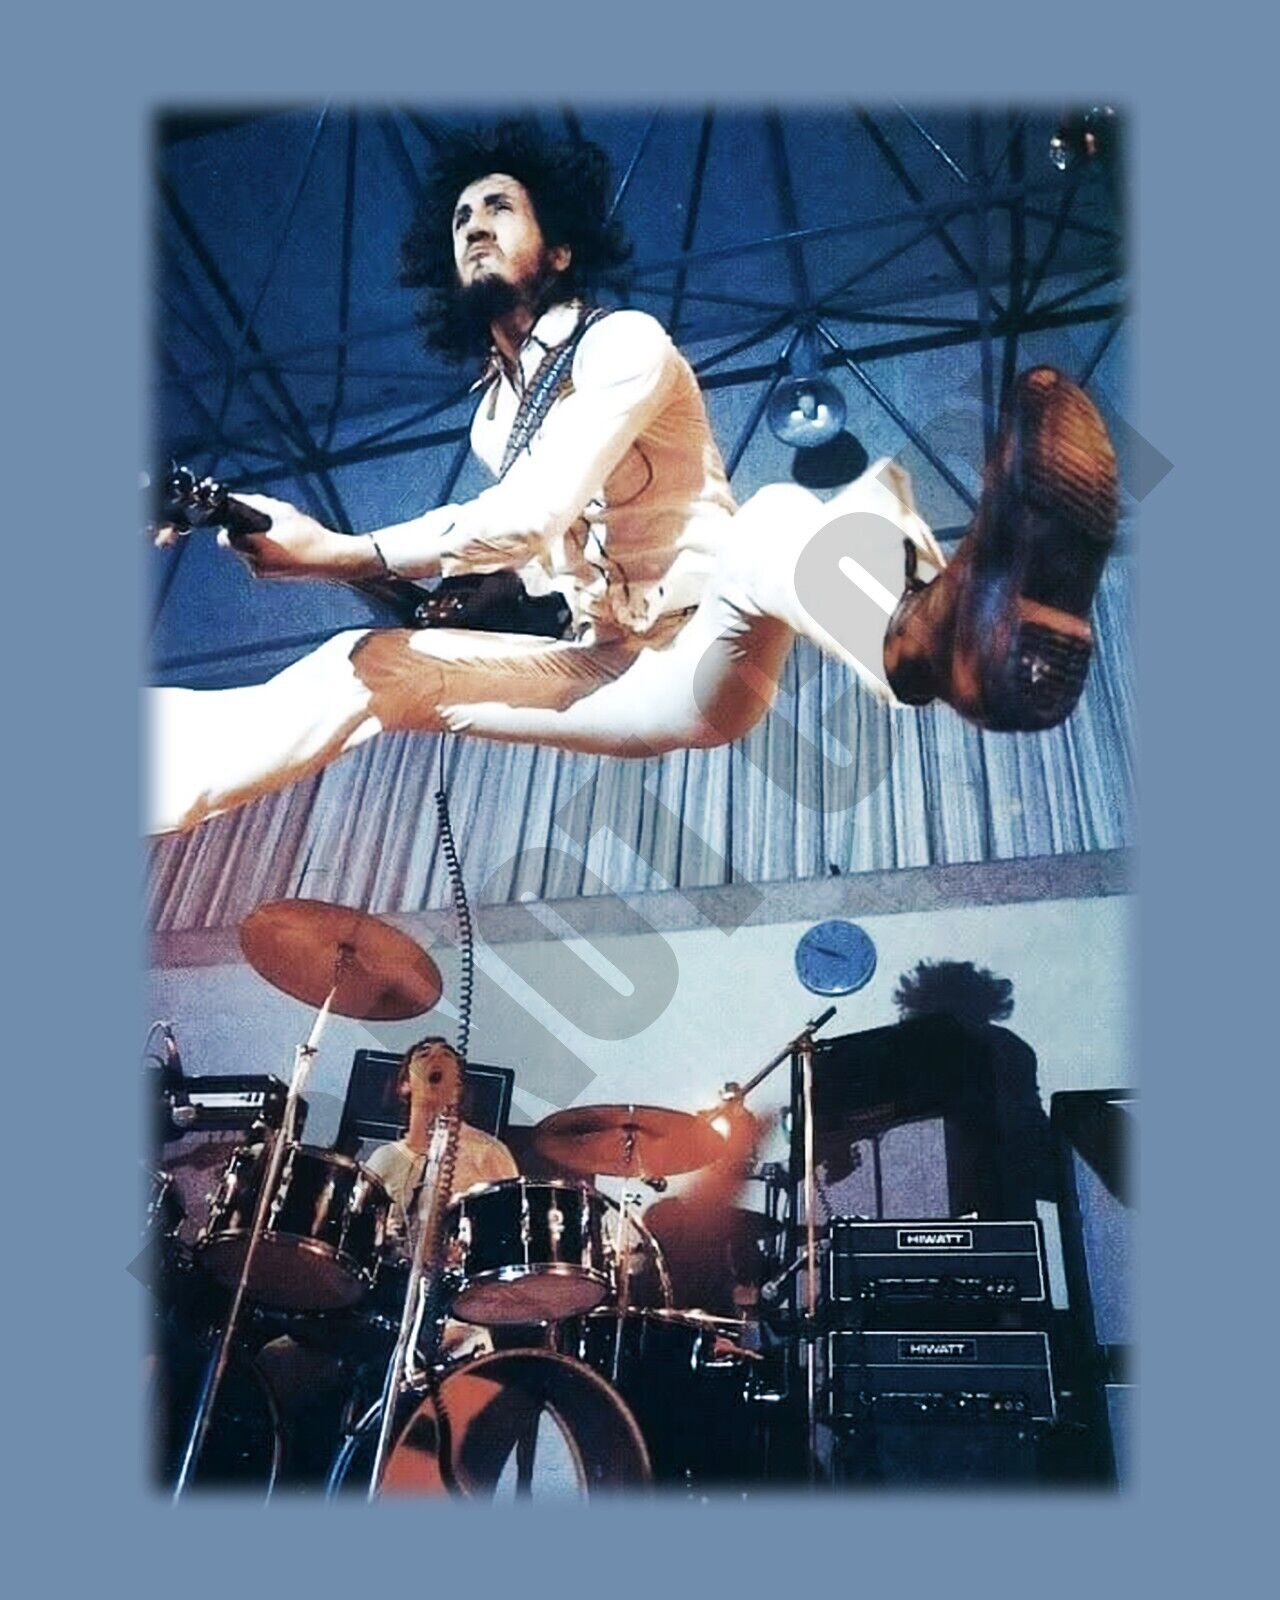 THE WHO Pete Townshend In Air During Concert 8x10 Photo